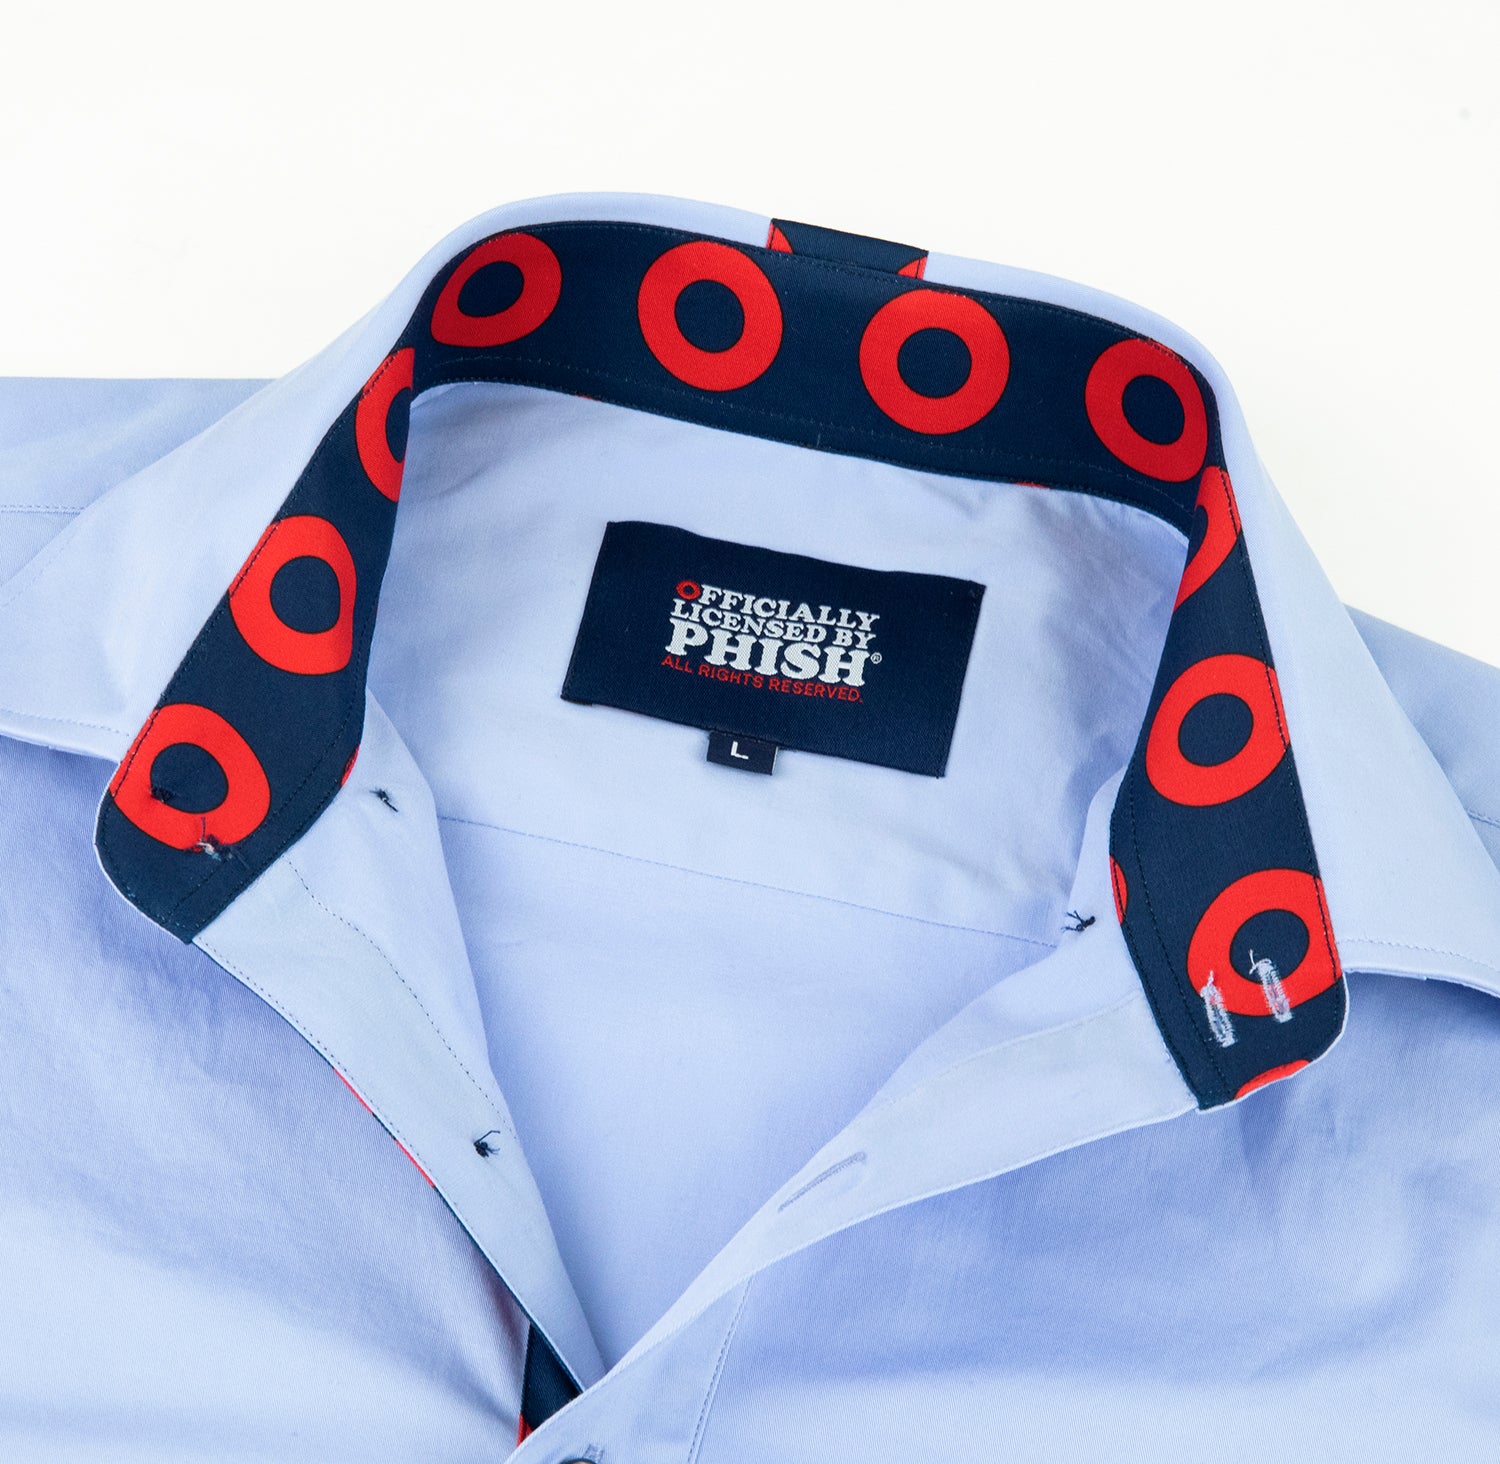 Phish Formal Long Sleeve Button Down in Light Blue - Section 119